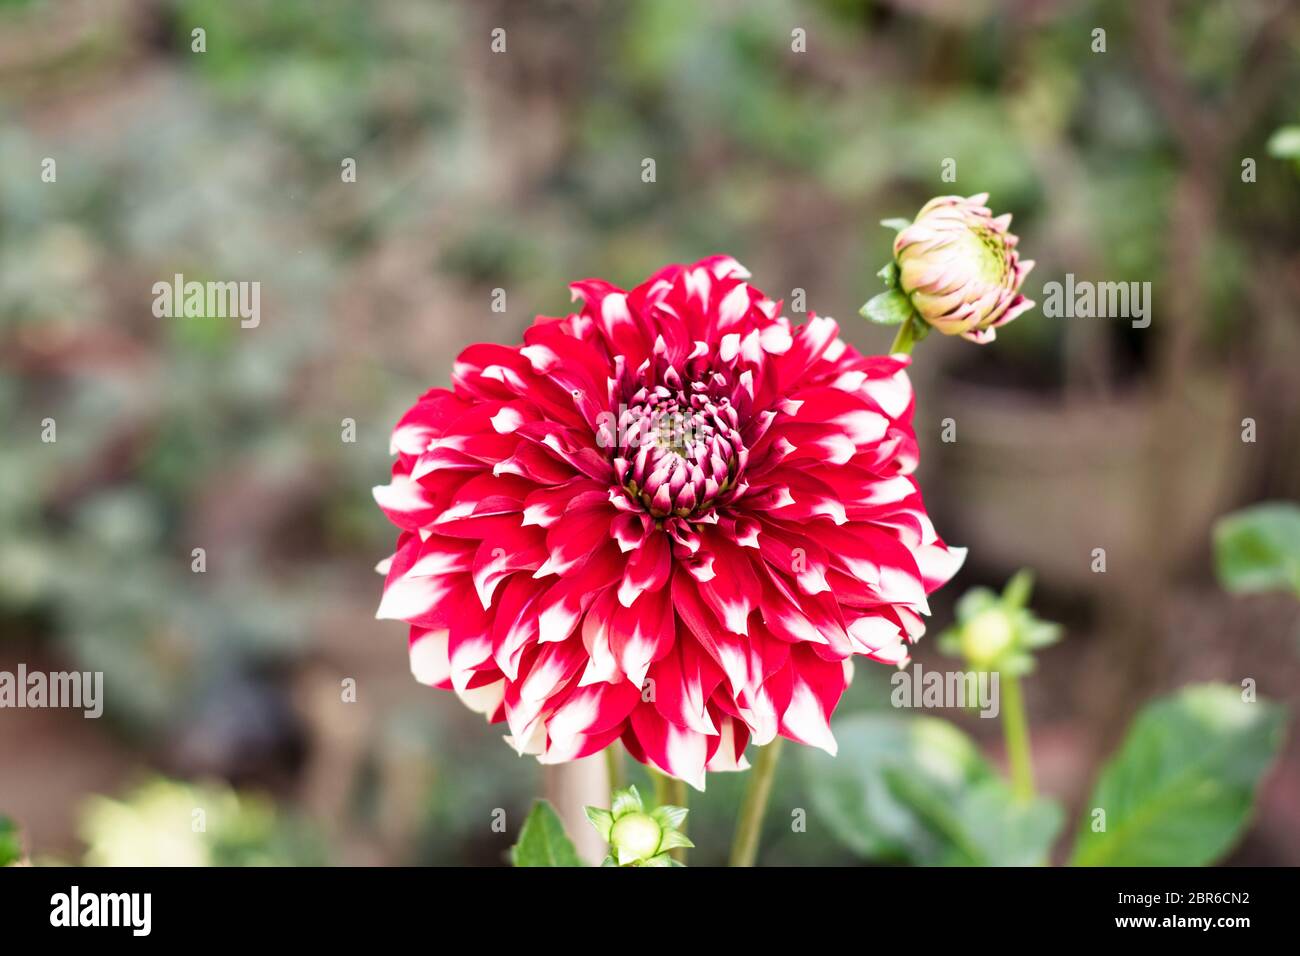 A pink white pincushion flower (Scabiosa columbaria) Related to species of sunflower, daisy, chrysanthemum, and zinnia. It is also called Pink Mist, a Stock Photo